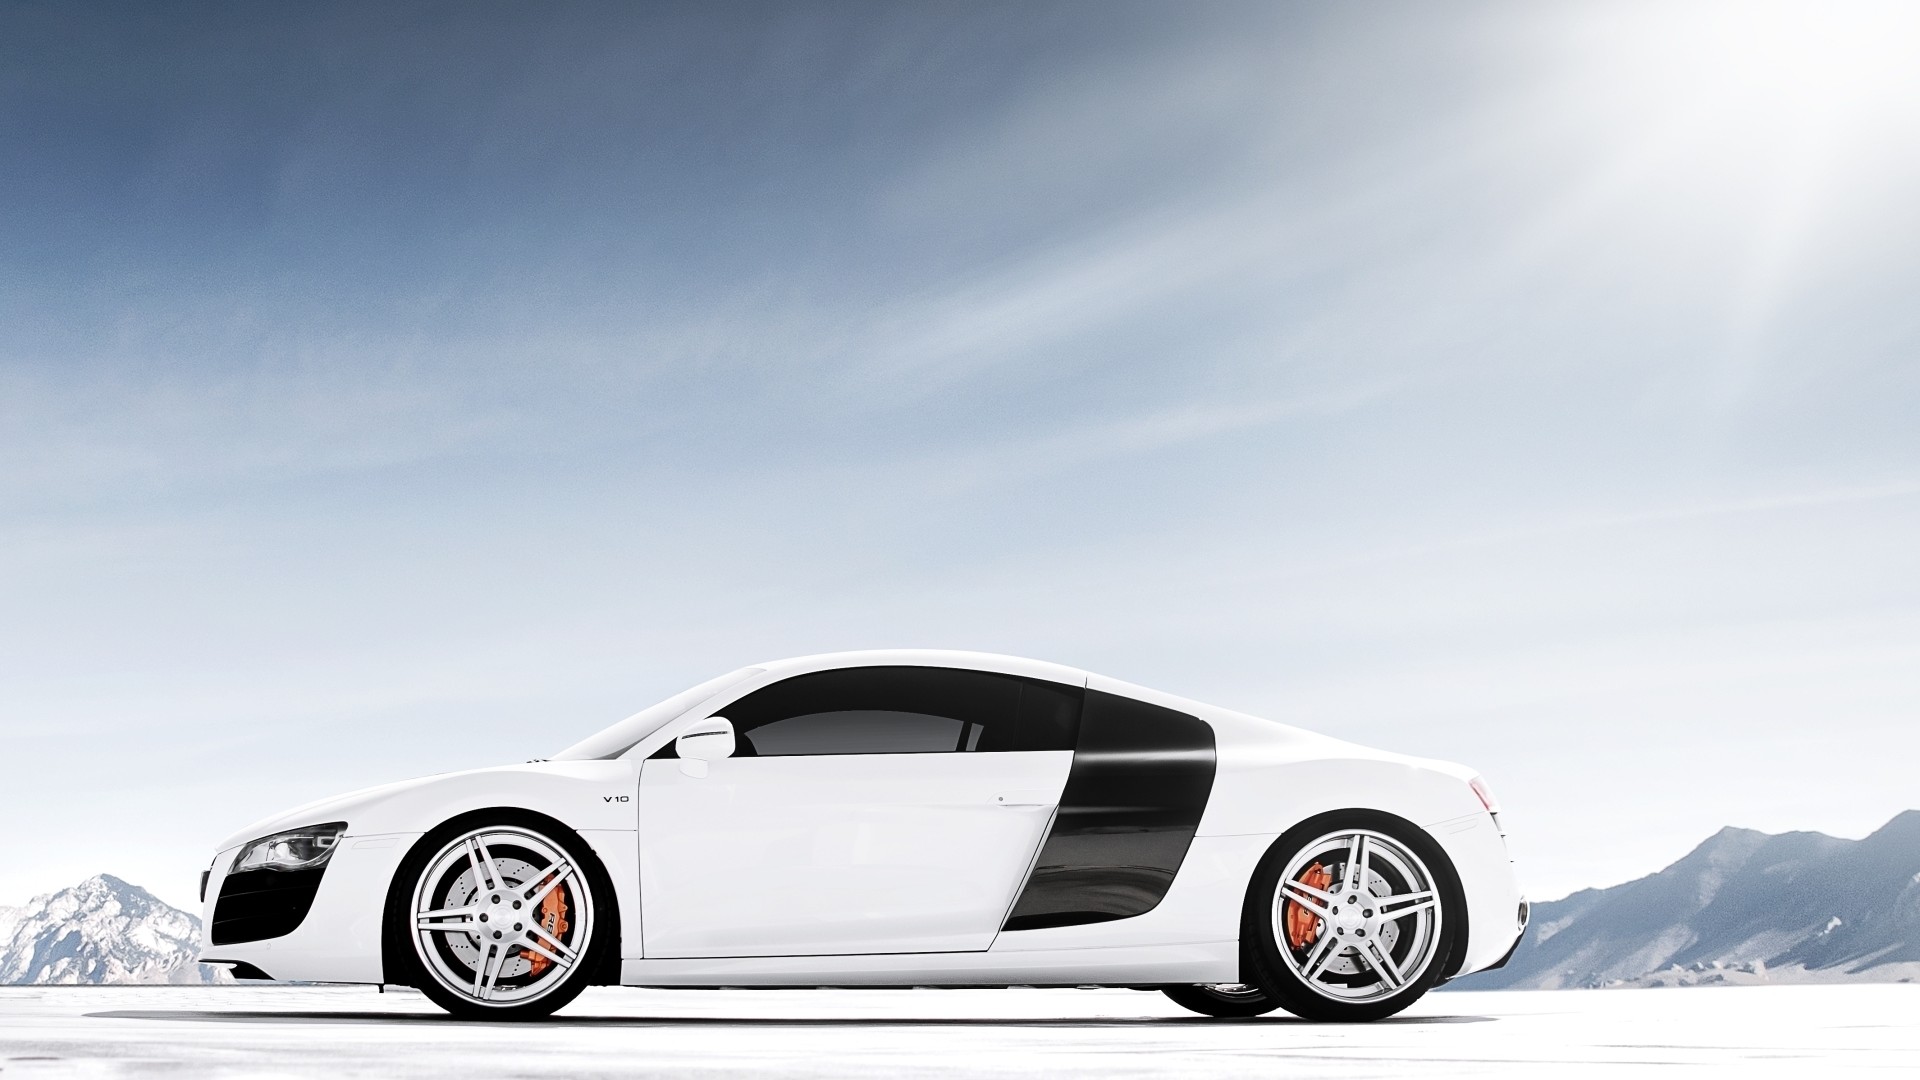 Audi Cars HD Wallpapers for mobile